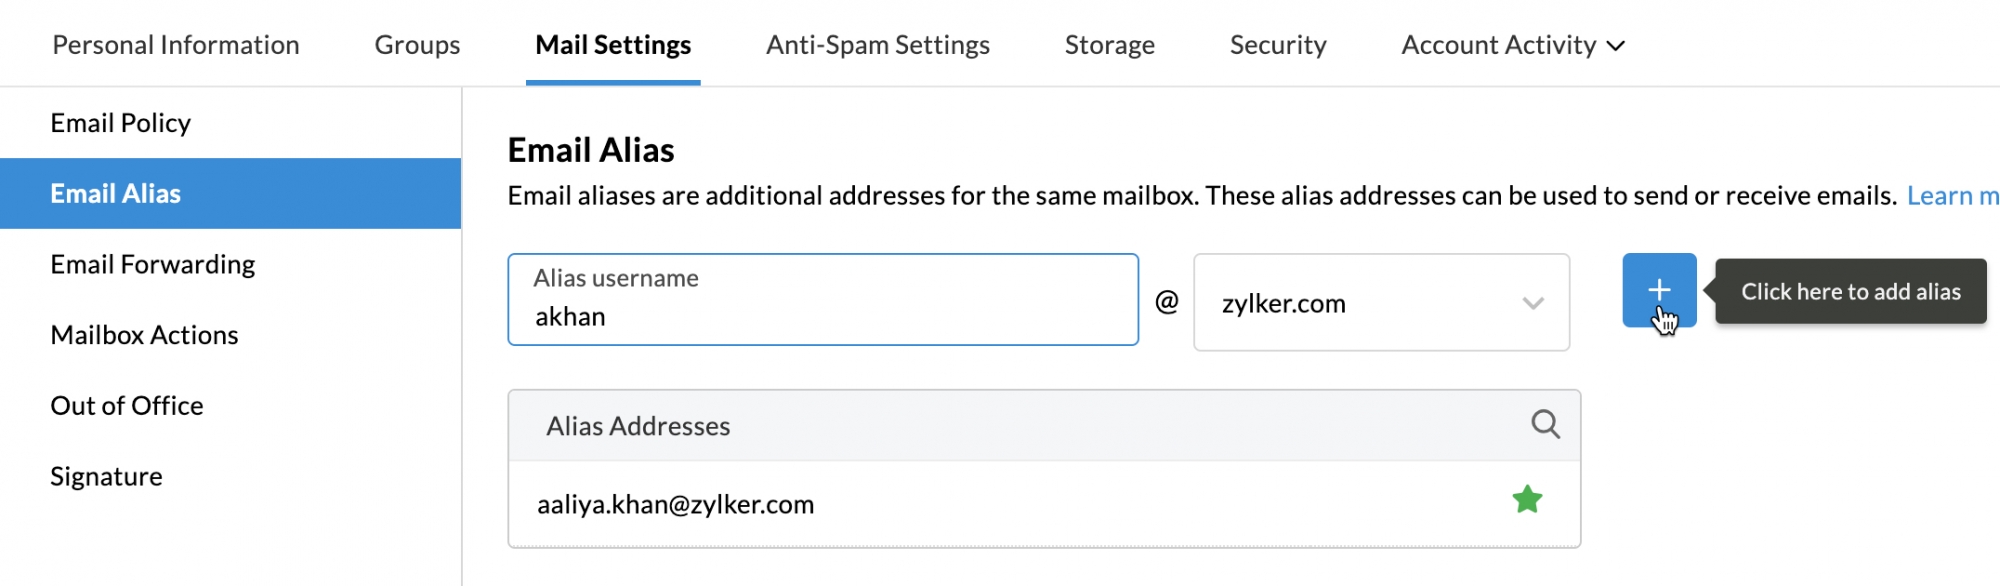 Create email alias - Additional email address - Forwarding email address